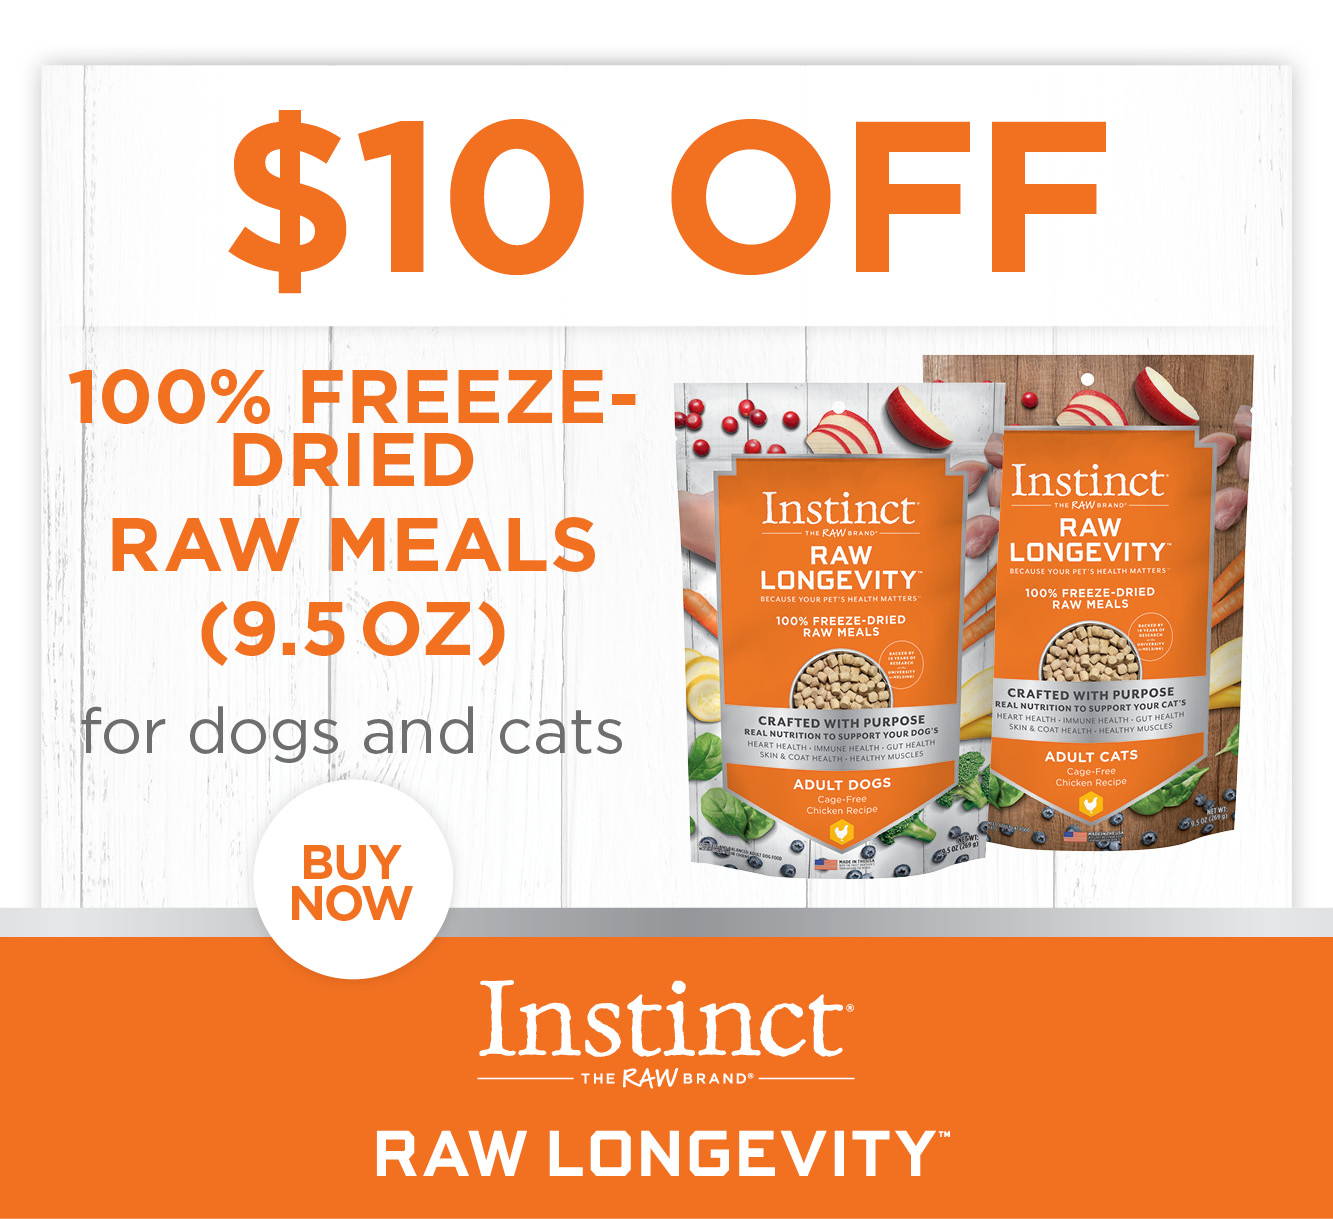 $10 off Instinct The Raw Brand 100% Freeze-Dried Raw Meals (9.5 oz) for dogs and cats